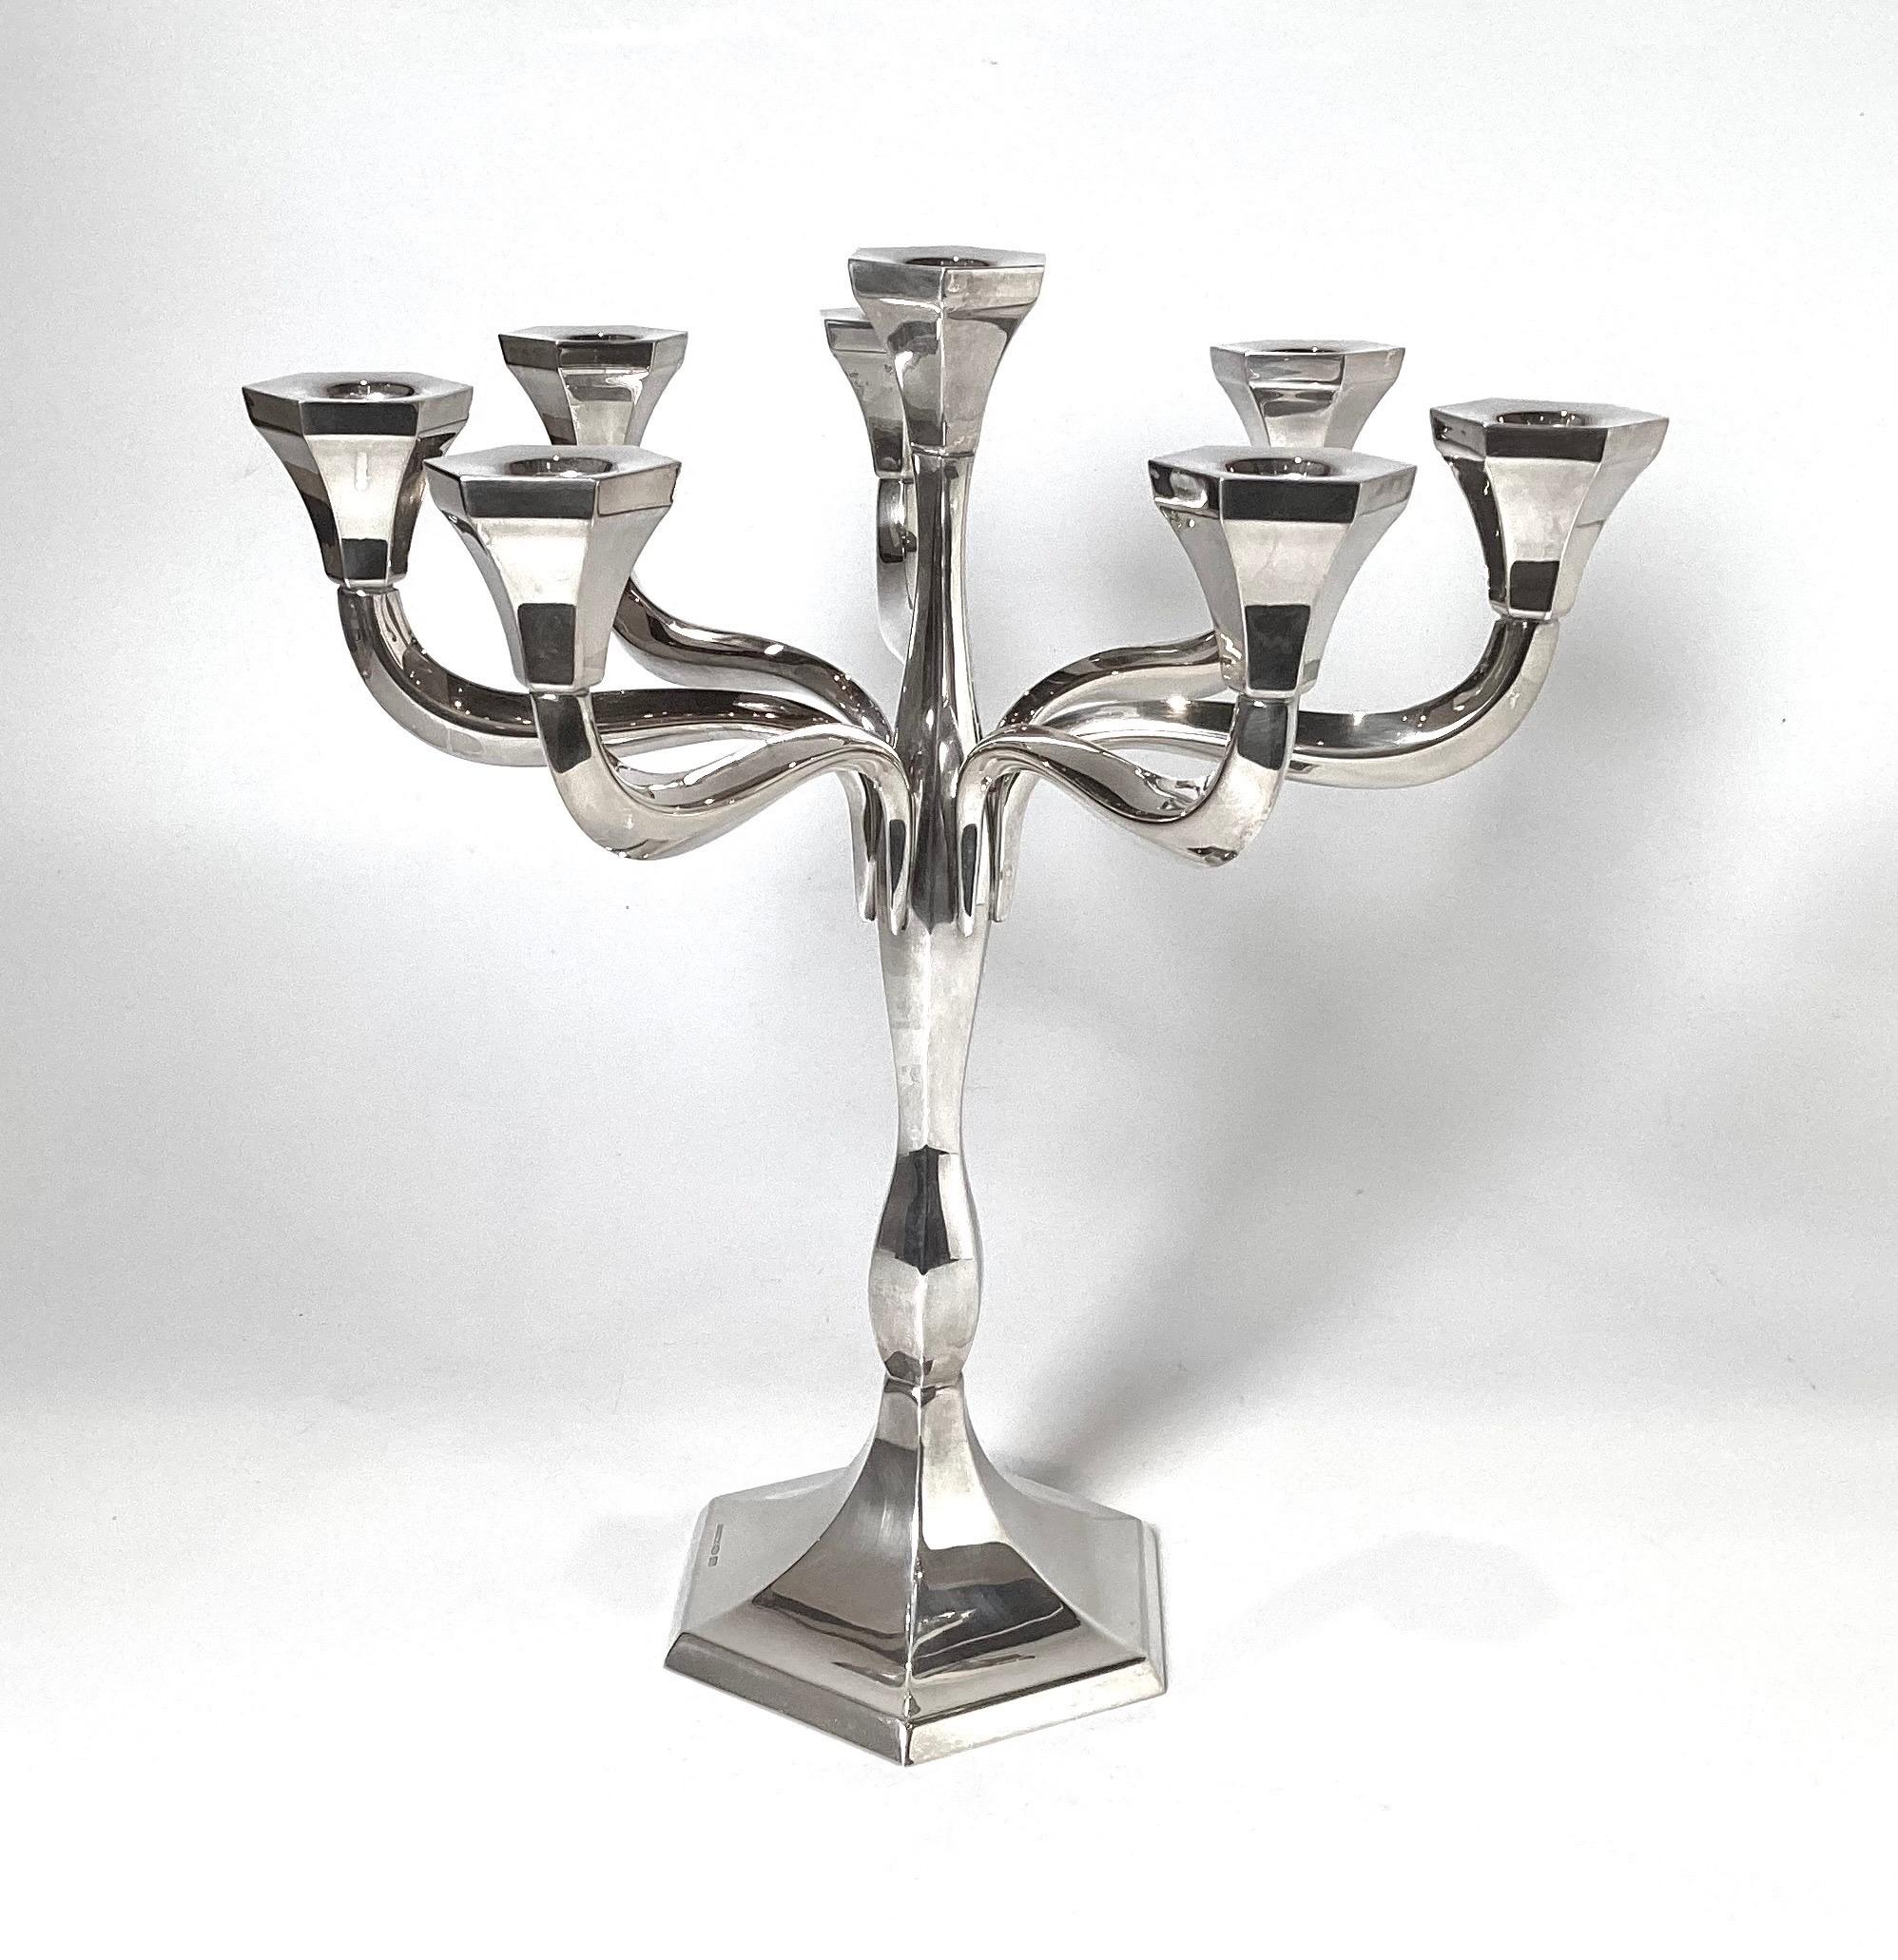 A sterling Silver Modern Judaica 8 light candelabra. Made by Hazorfim, late 20th Century. Signed on base edge.